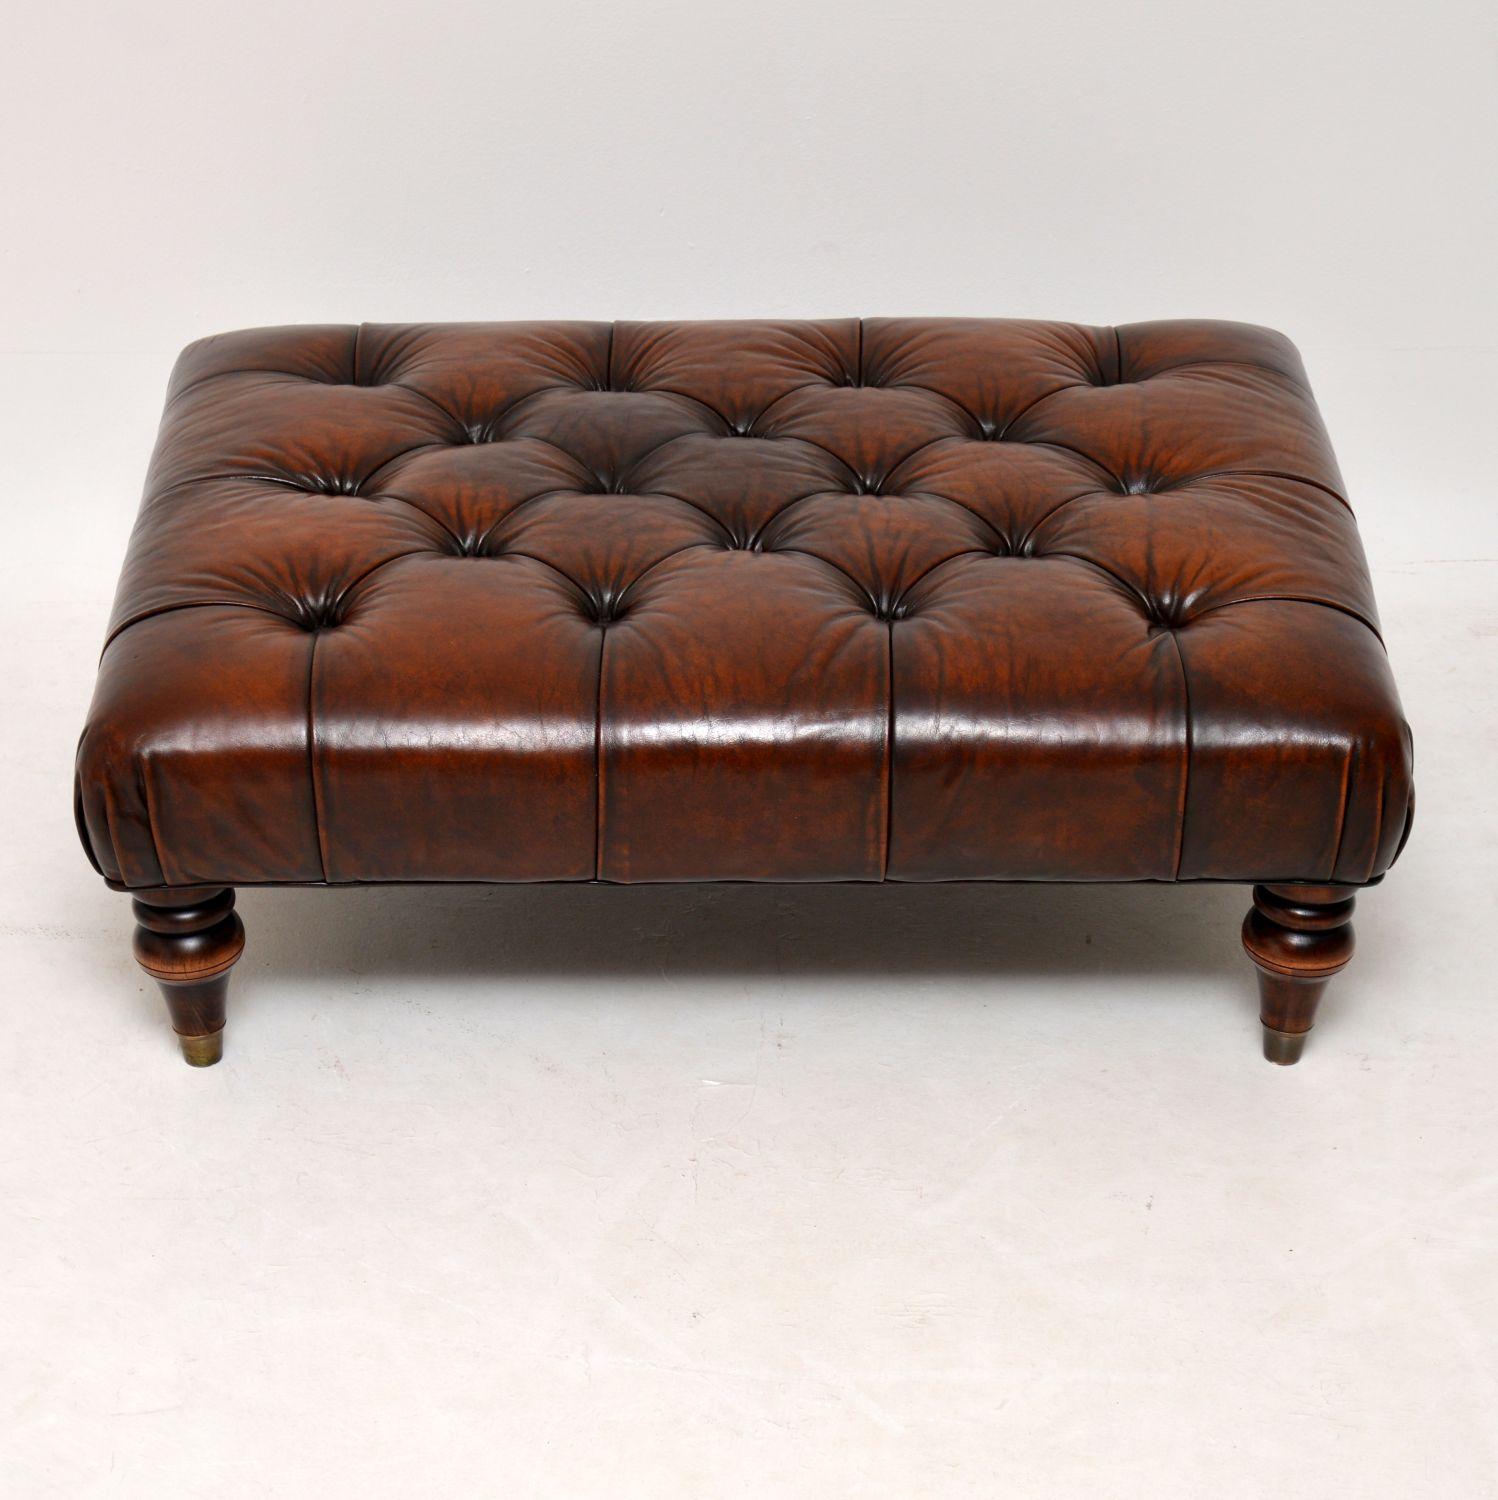 Antique Victorian style deep buttoned leather stool on turned legs with brass caps. It’s in good original condition & the leather has lots of character. I don’t think it’s much more than 50 years old, but it actually looks older.

Measures: Width